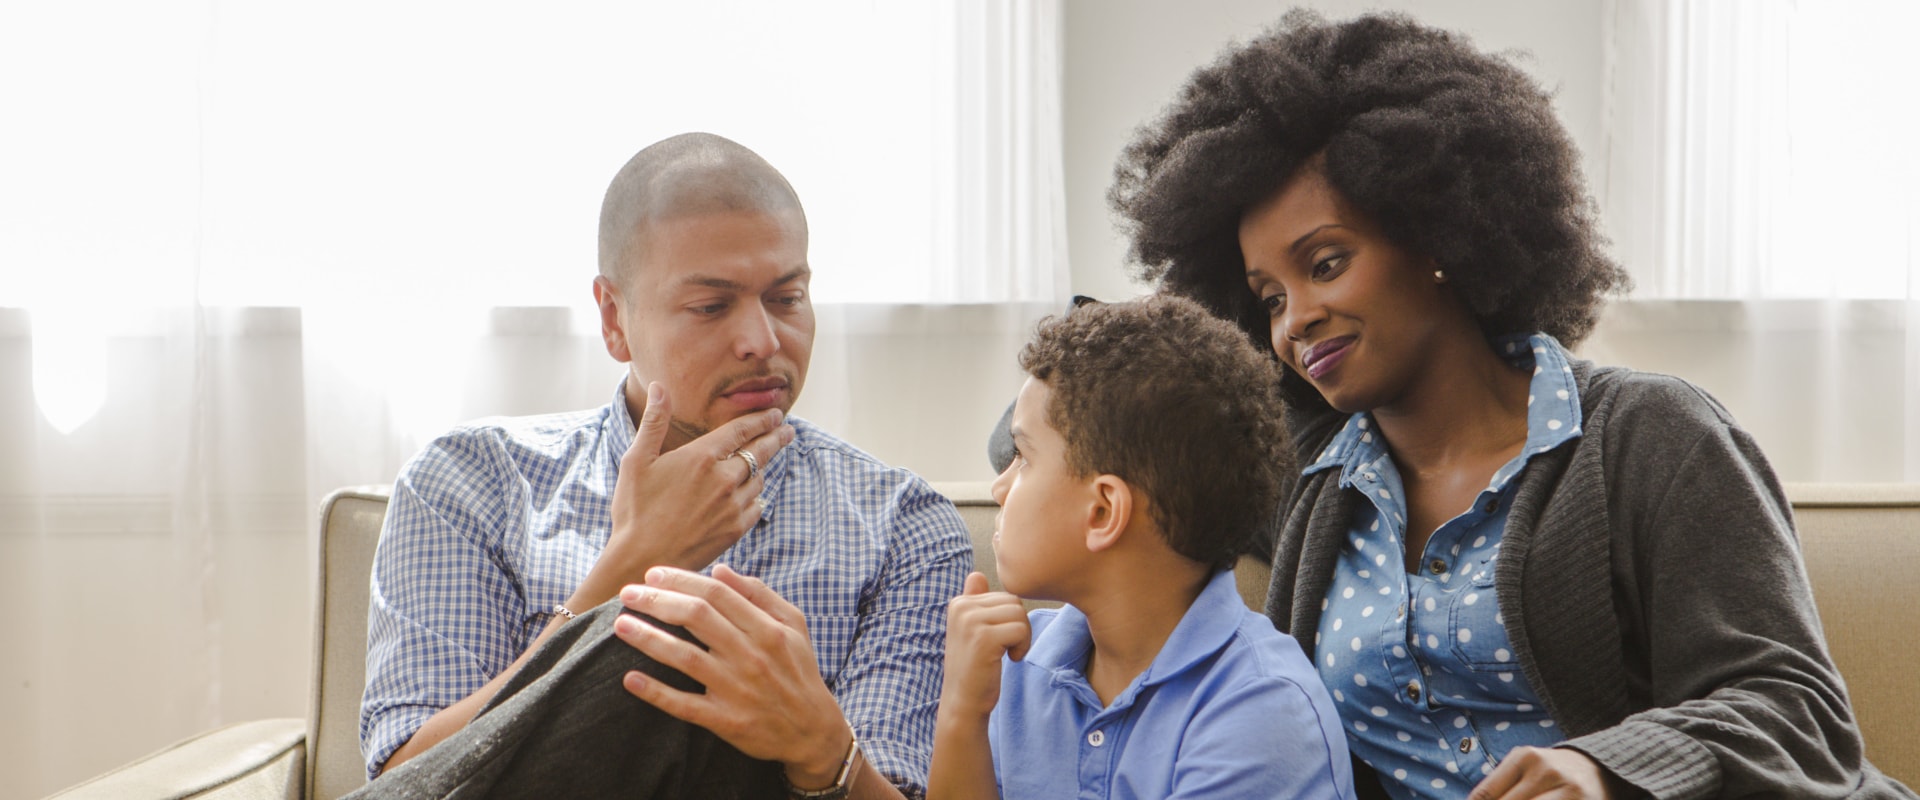 What can a parent do if a child has trouble speaking?